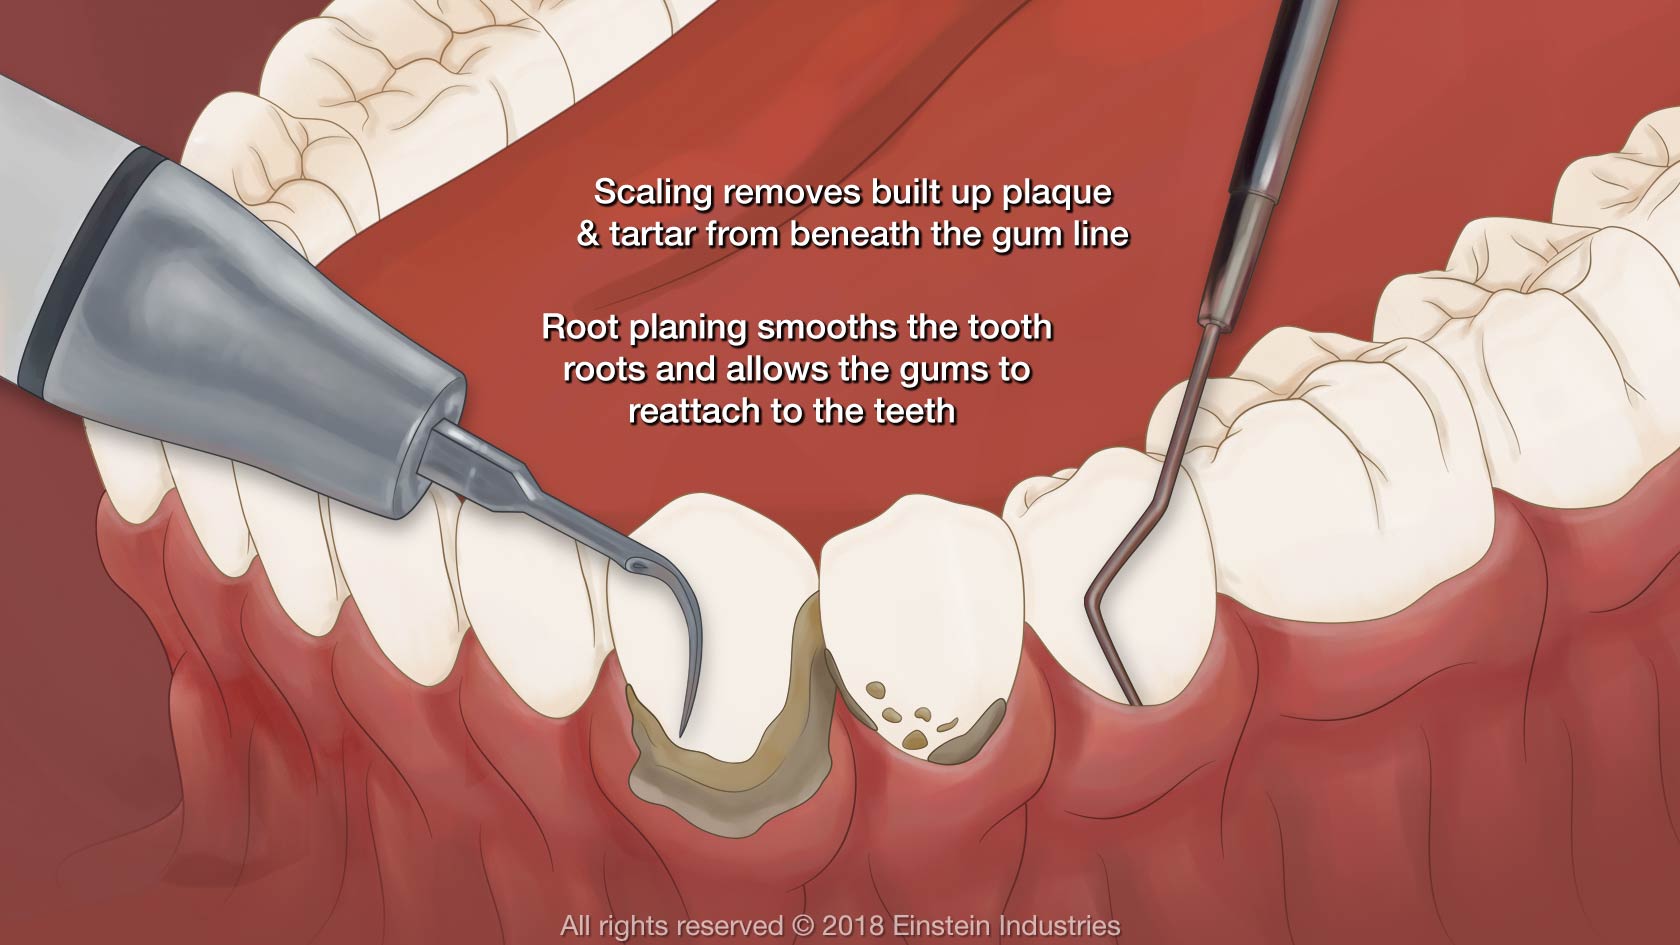 What is the cause of tooth sensitivity after scaling?